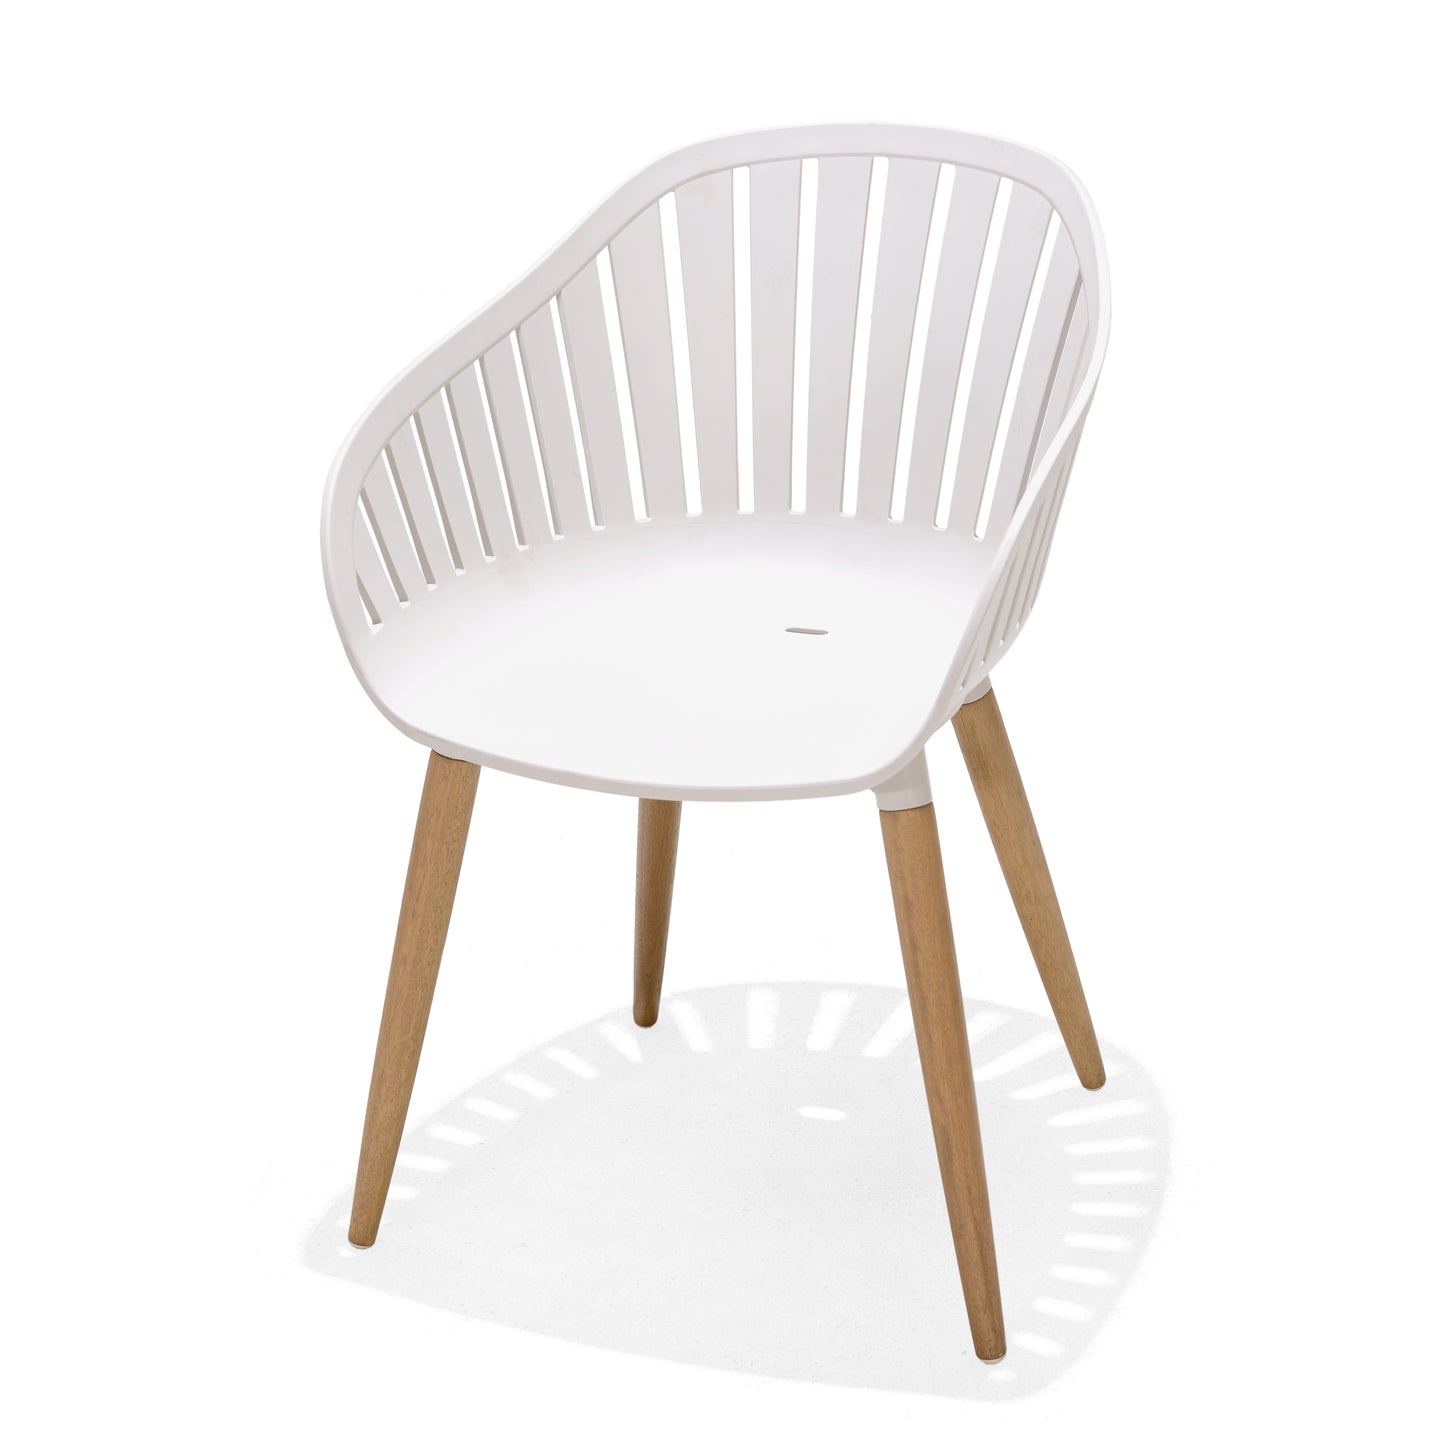 Set of 2 Recycled Carver Chairs - White